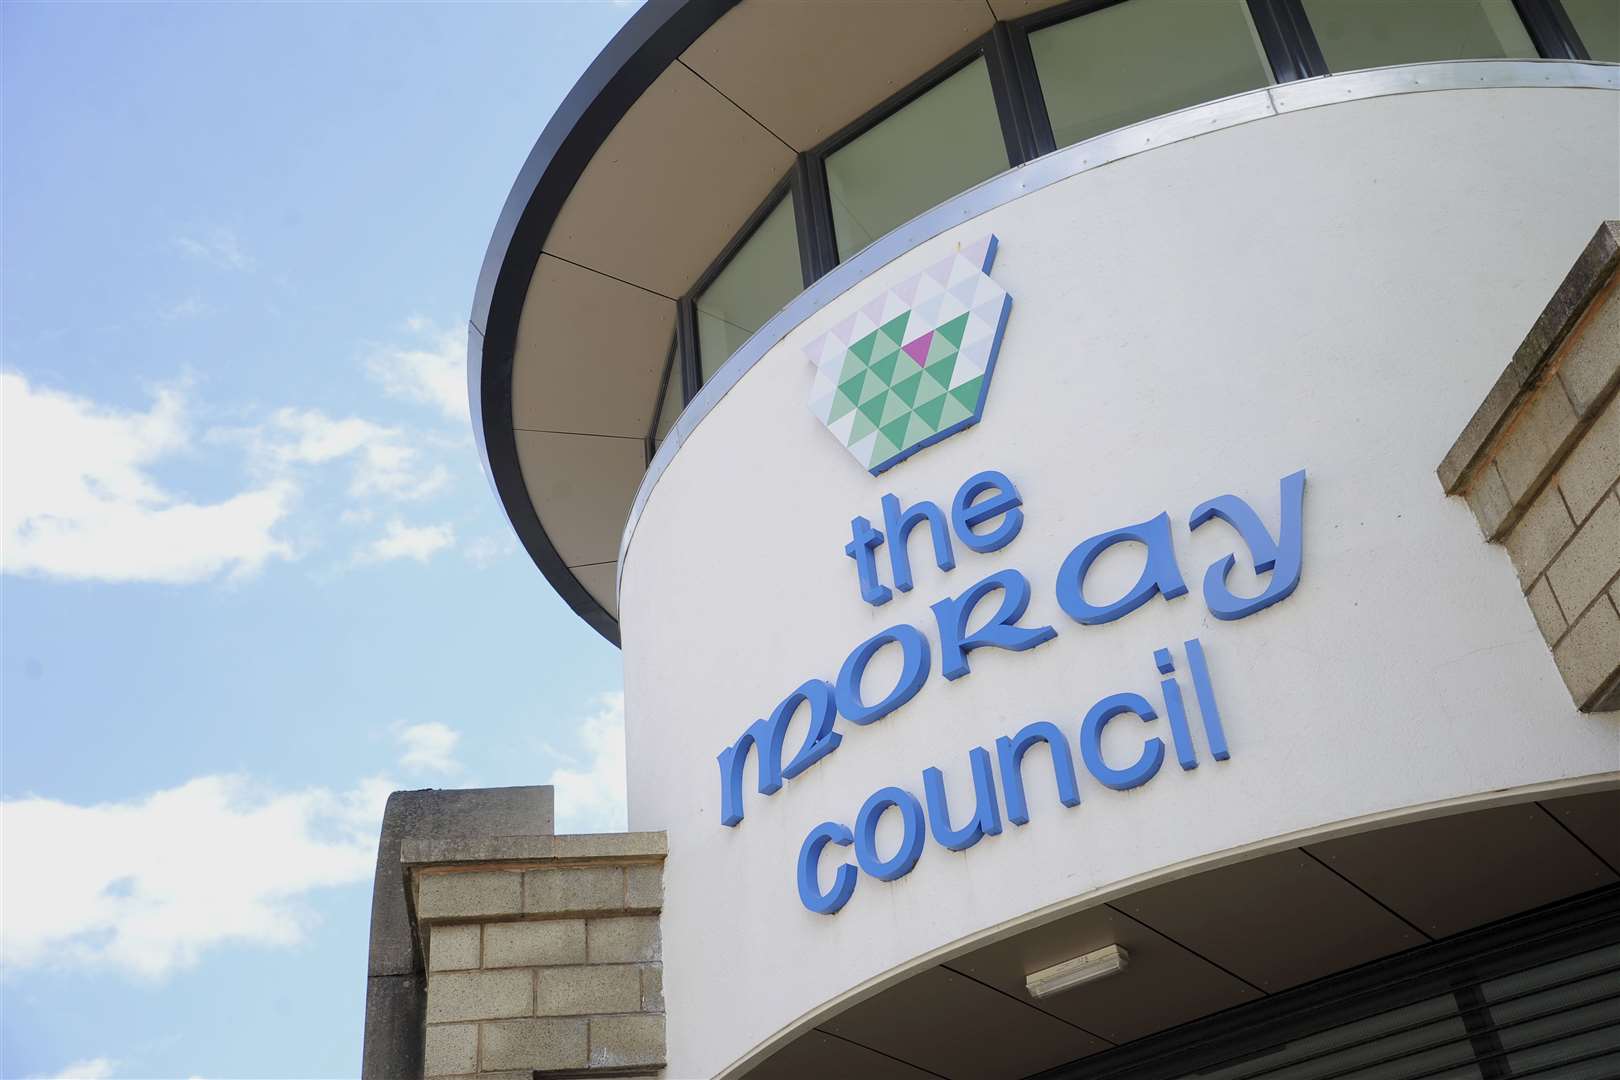 The fund will be administered by Moray Council.